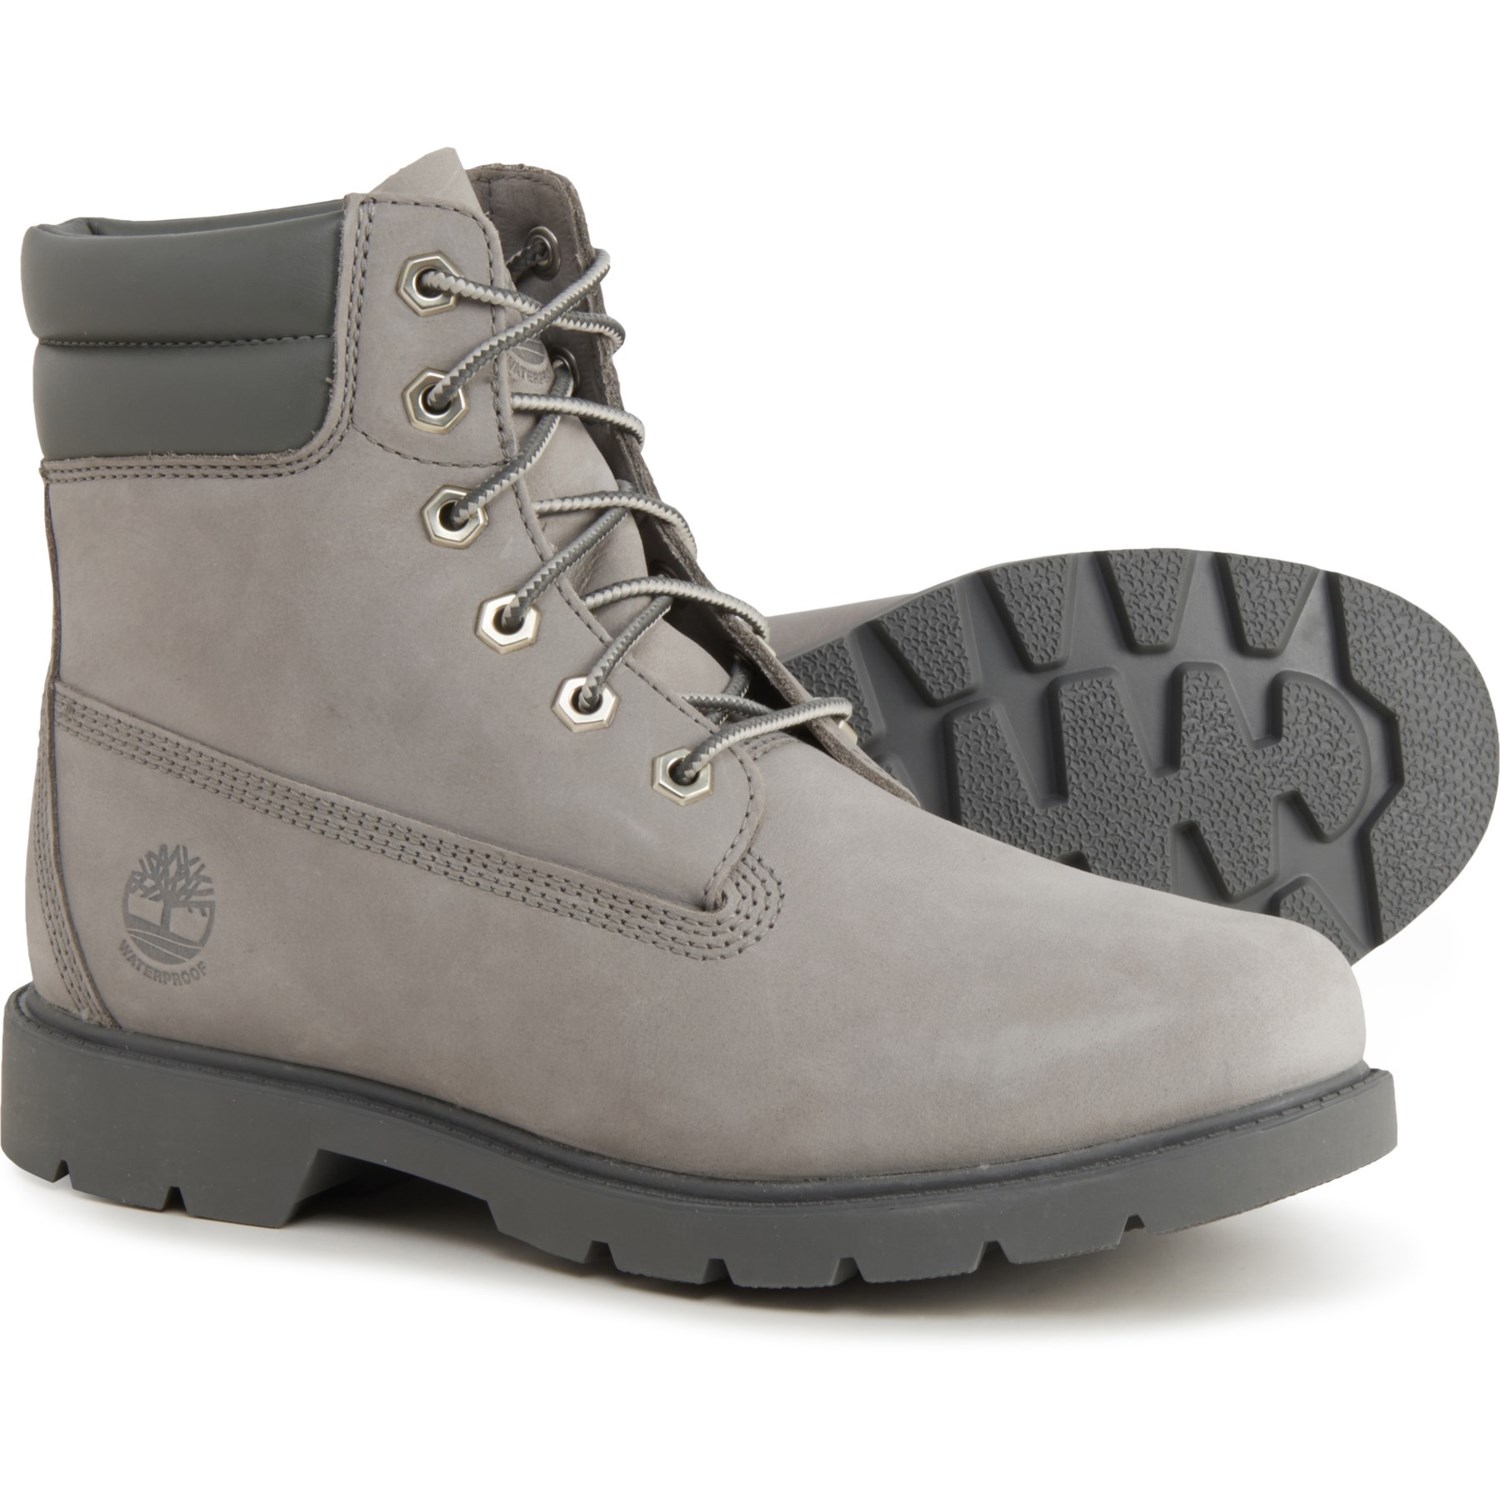 Timberland Linden Woods 6” Lace-Up Boots (For Women) - Save 41%